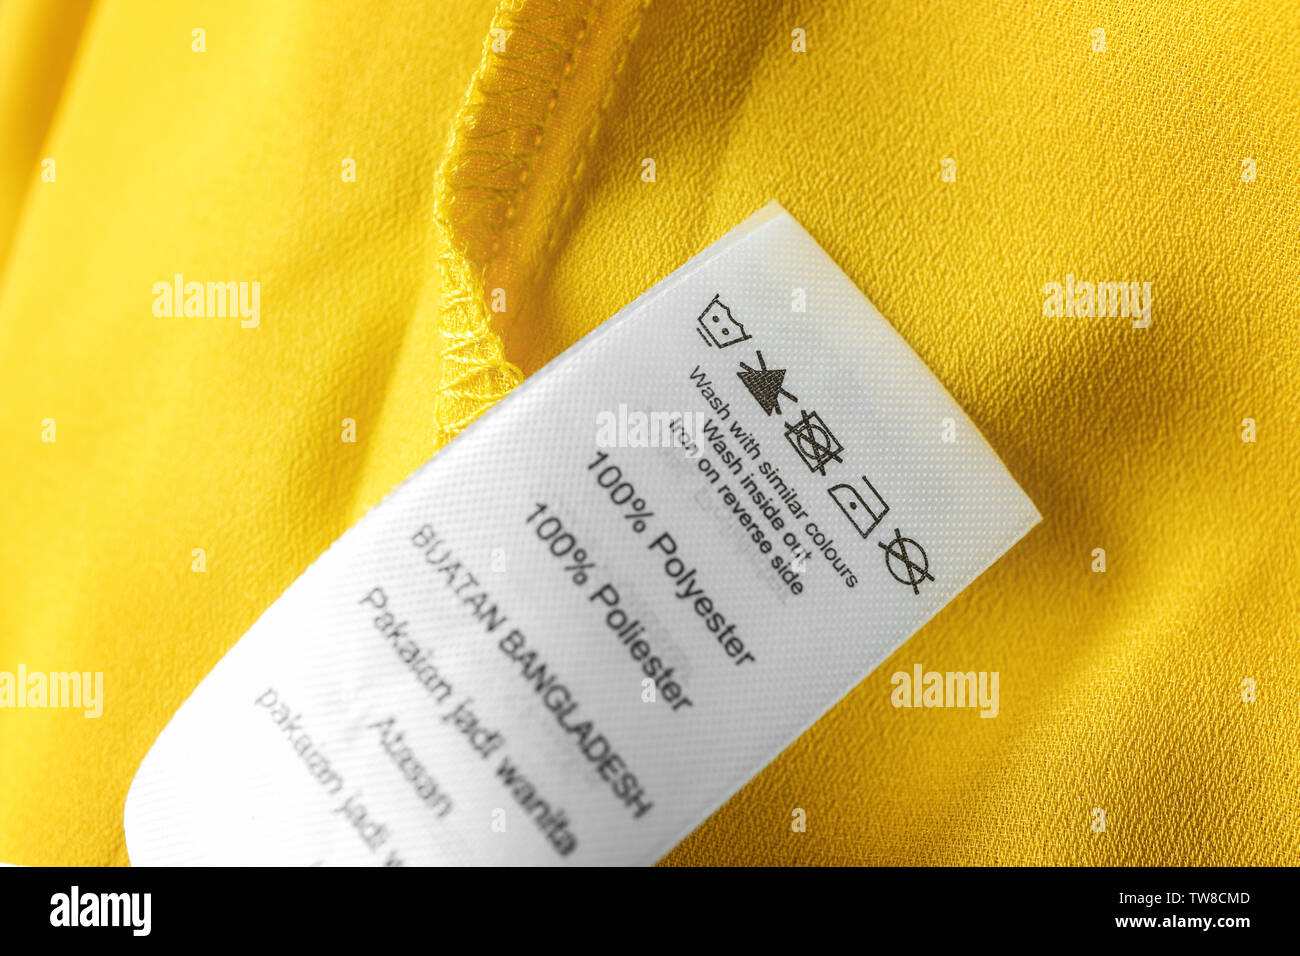 Clothing label with laundry instructions, closeup Stock Photo